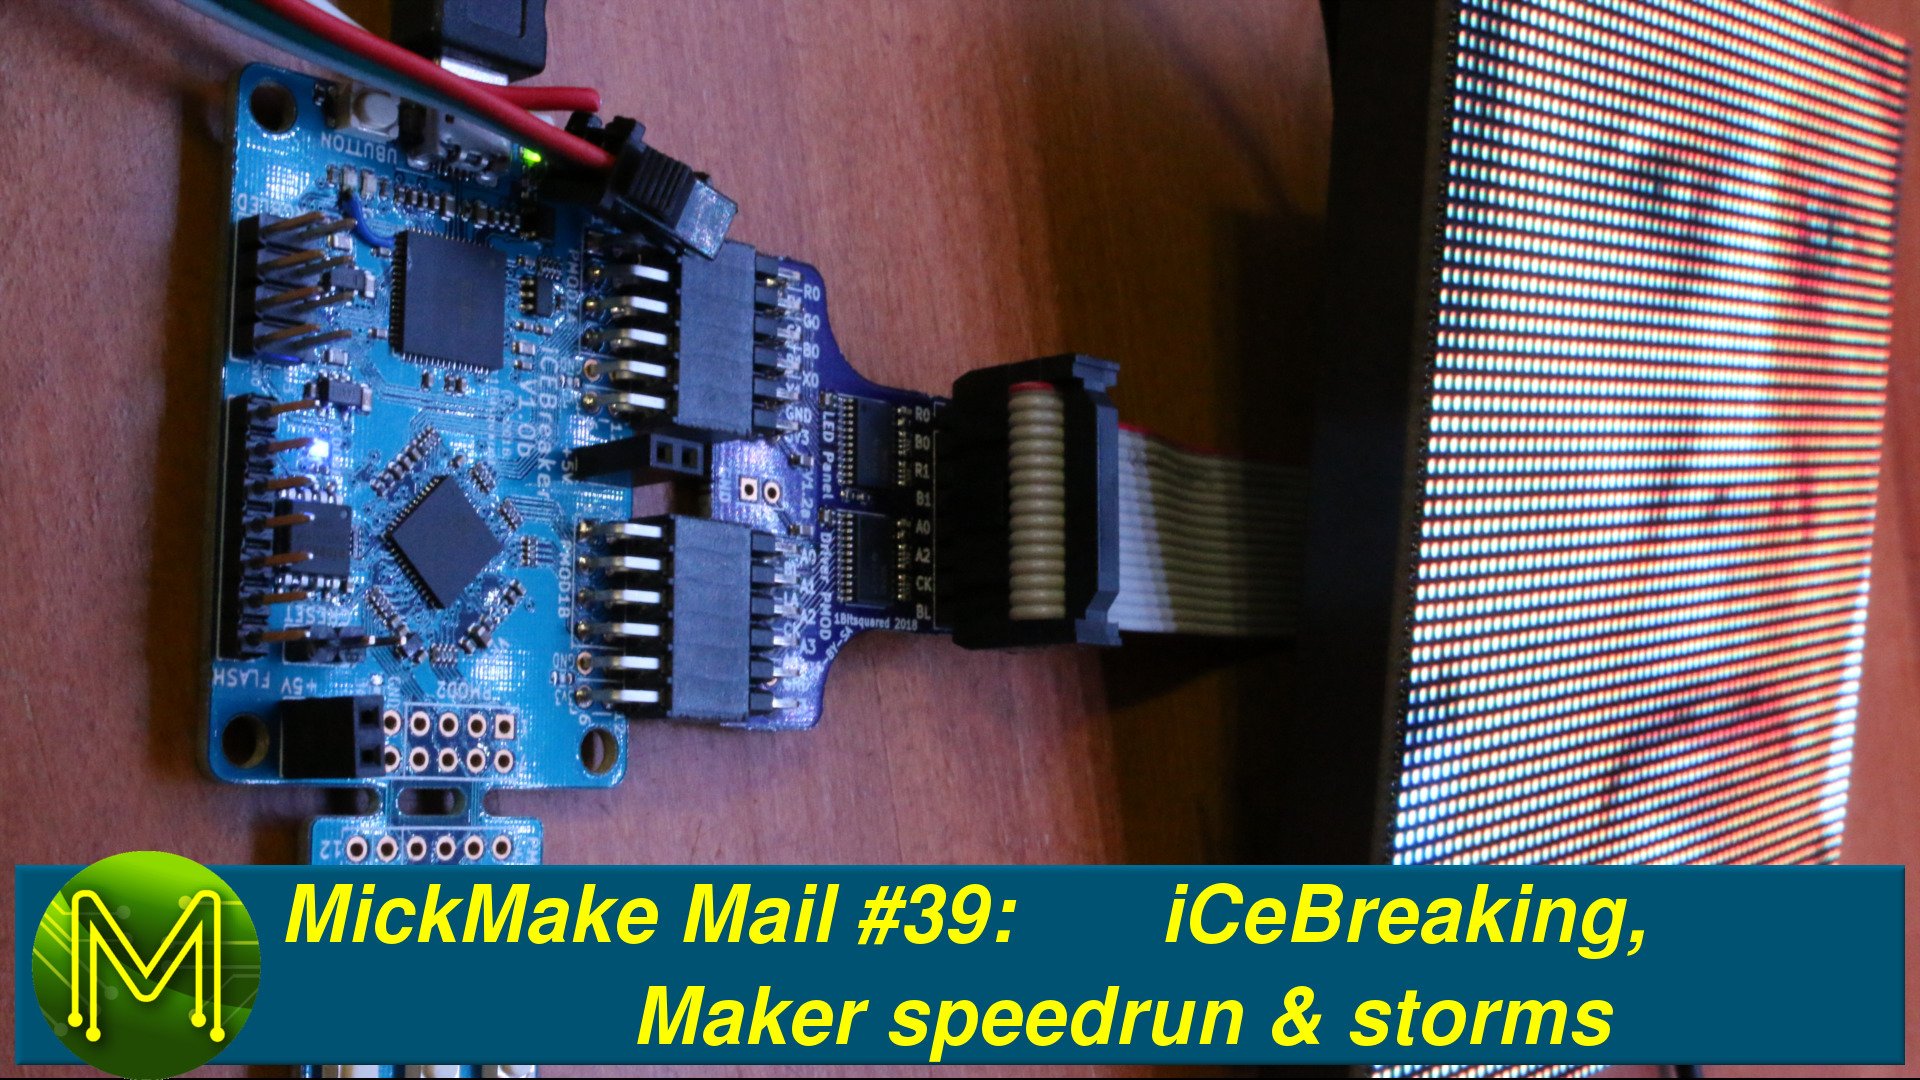 MickMake Mail #39: iCeBreaking, Maker speedrun and storms.